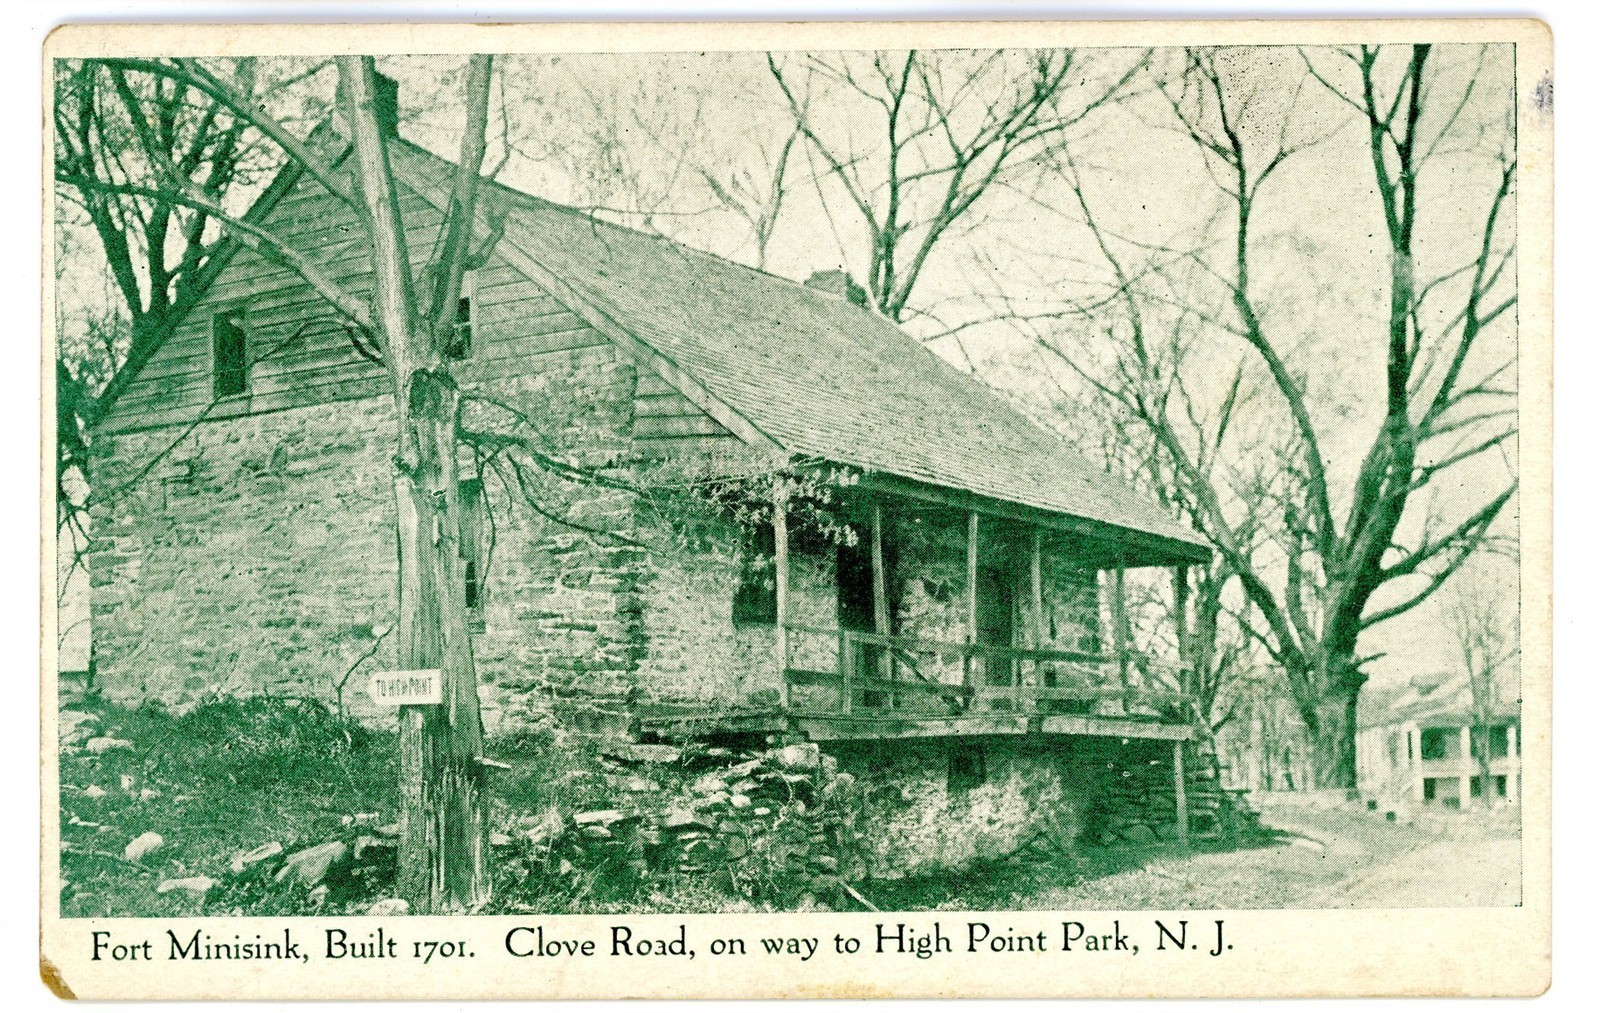 High Point vicinity - Fort Minisink on Clove Road to High Point - Built 1701 - c 1910